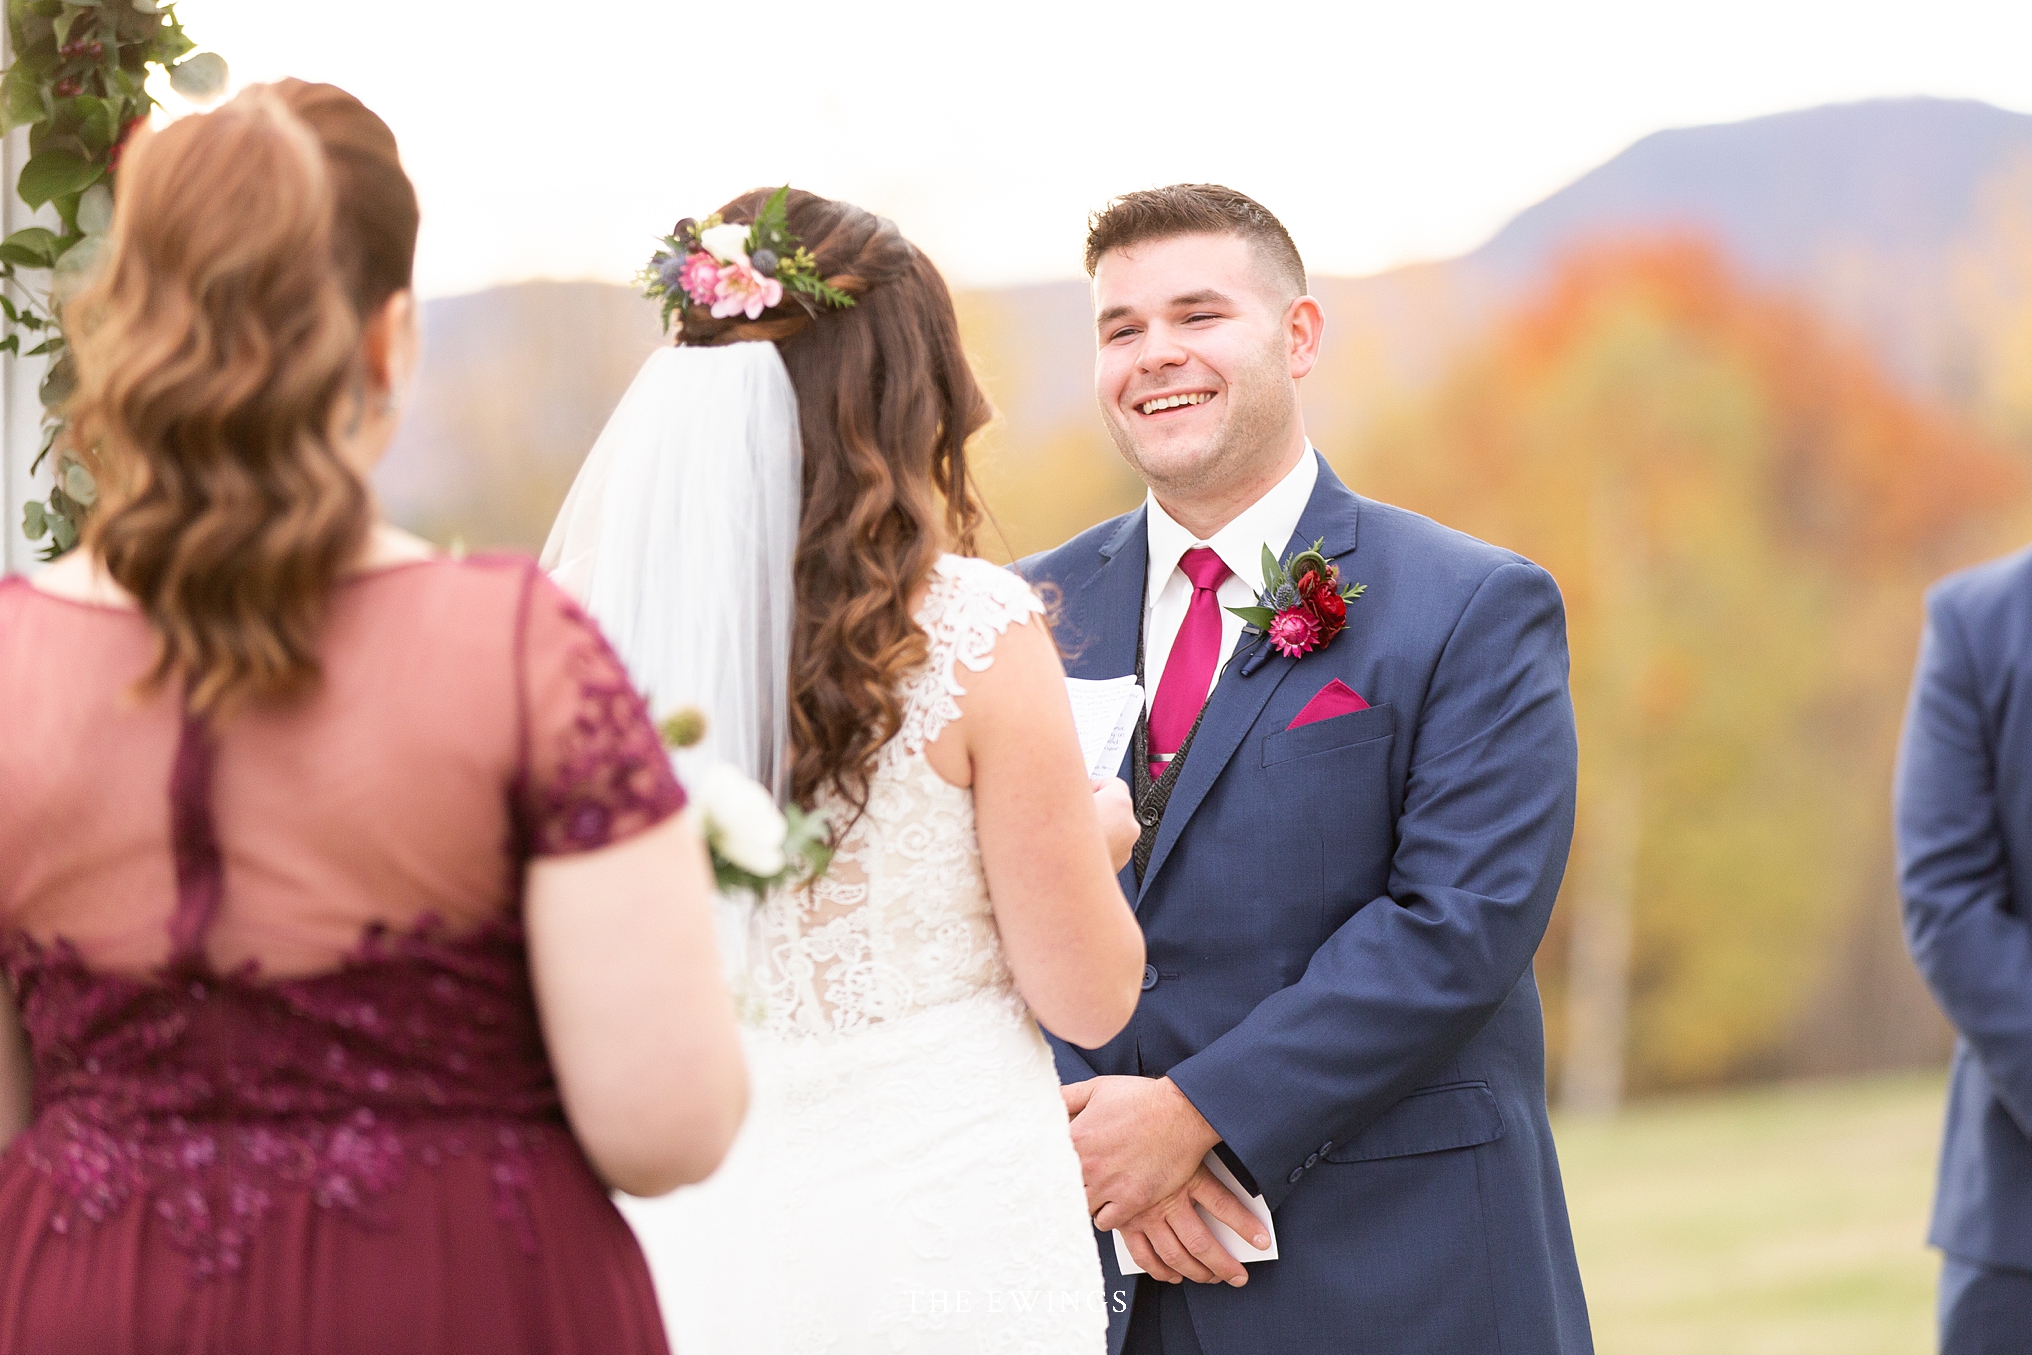 These two were married at the Mountainview Grand in the white mountains of New Hampshire, with views of Mount Washington and the Presidential Range wedding.